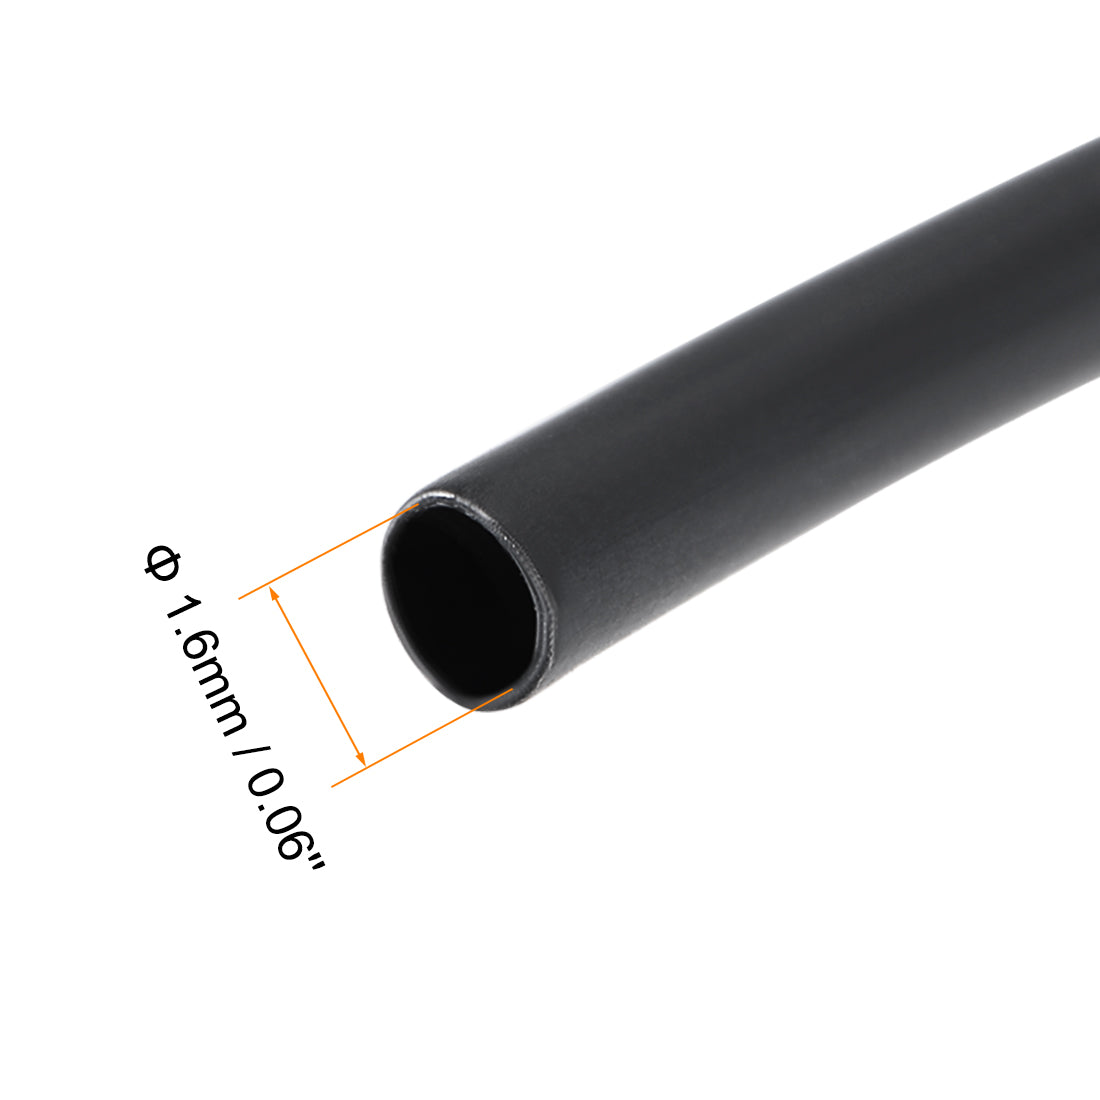 uxcell Uxcell Heat Shrink Tubing, 1/16"(1.6mm) Dia 3.65mm Flat Width 3:1 rate 10ft - Black